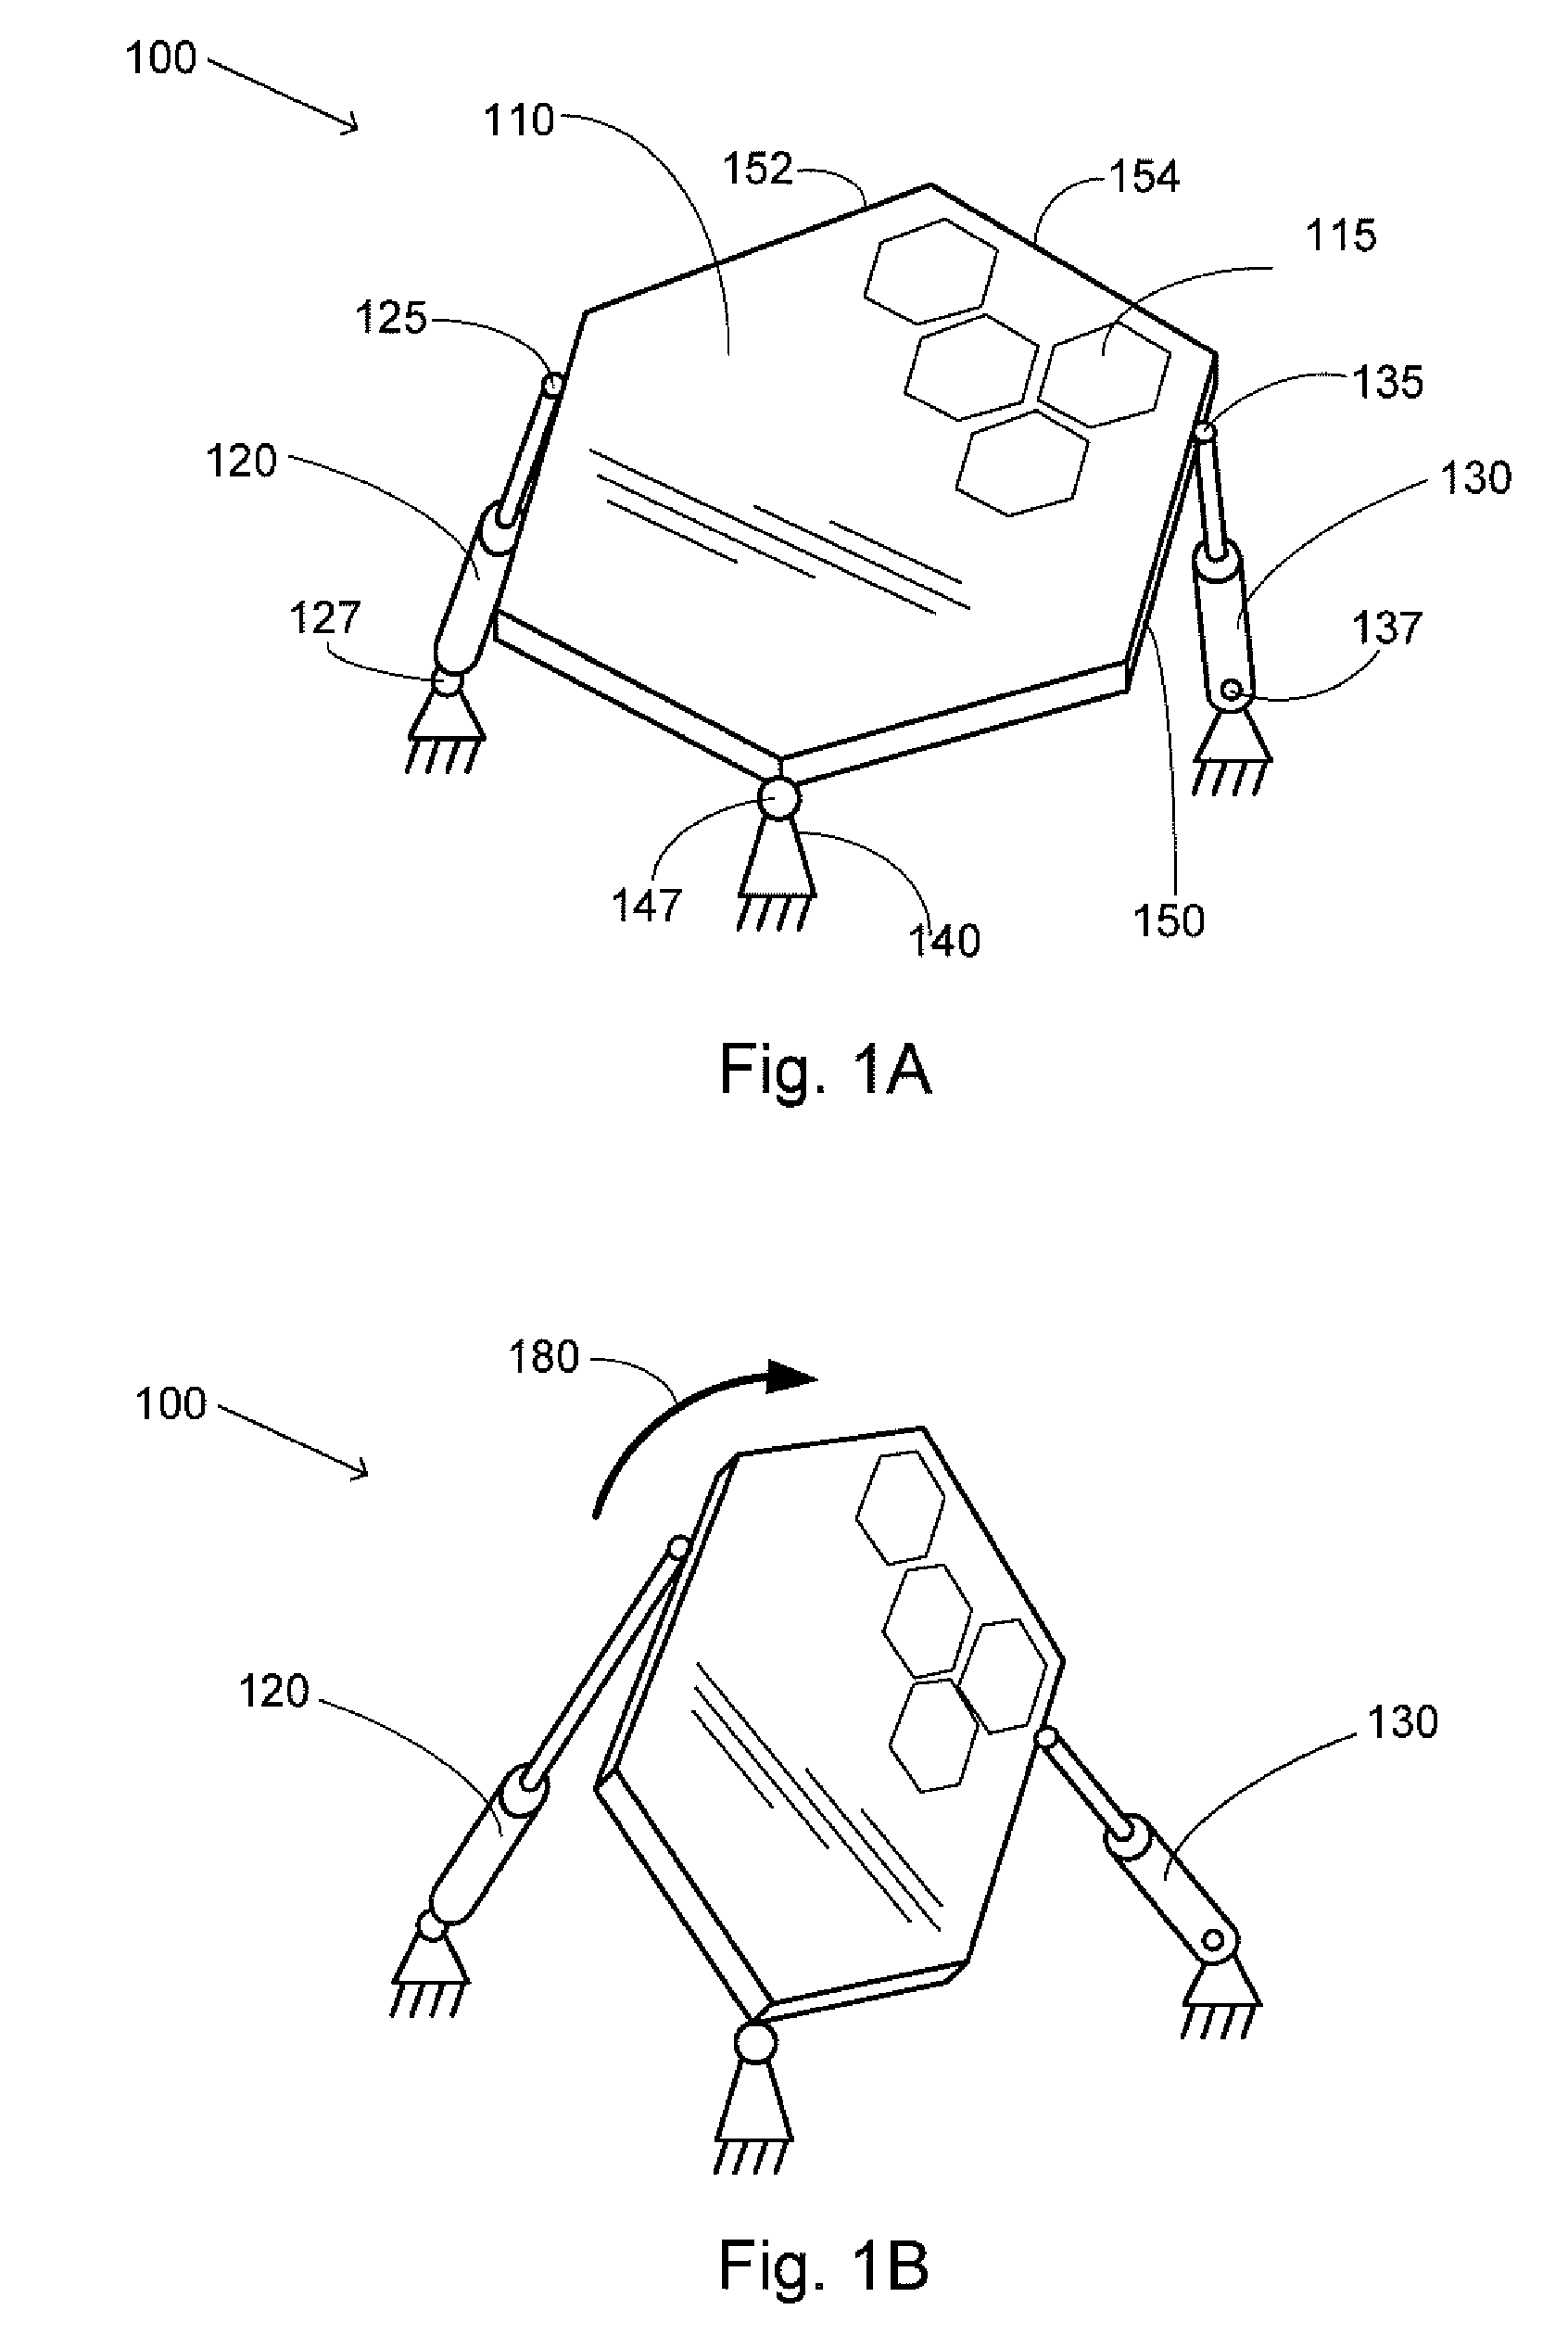 System and Method for Solar Tracking